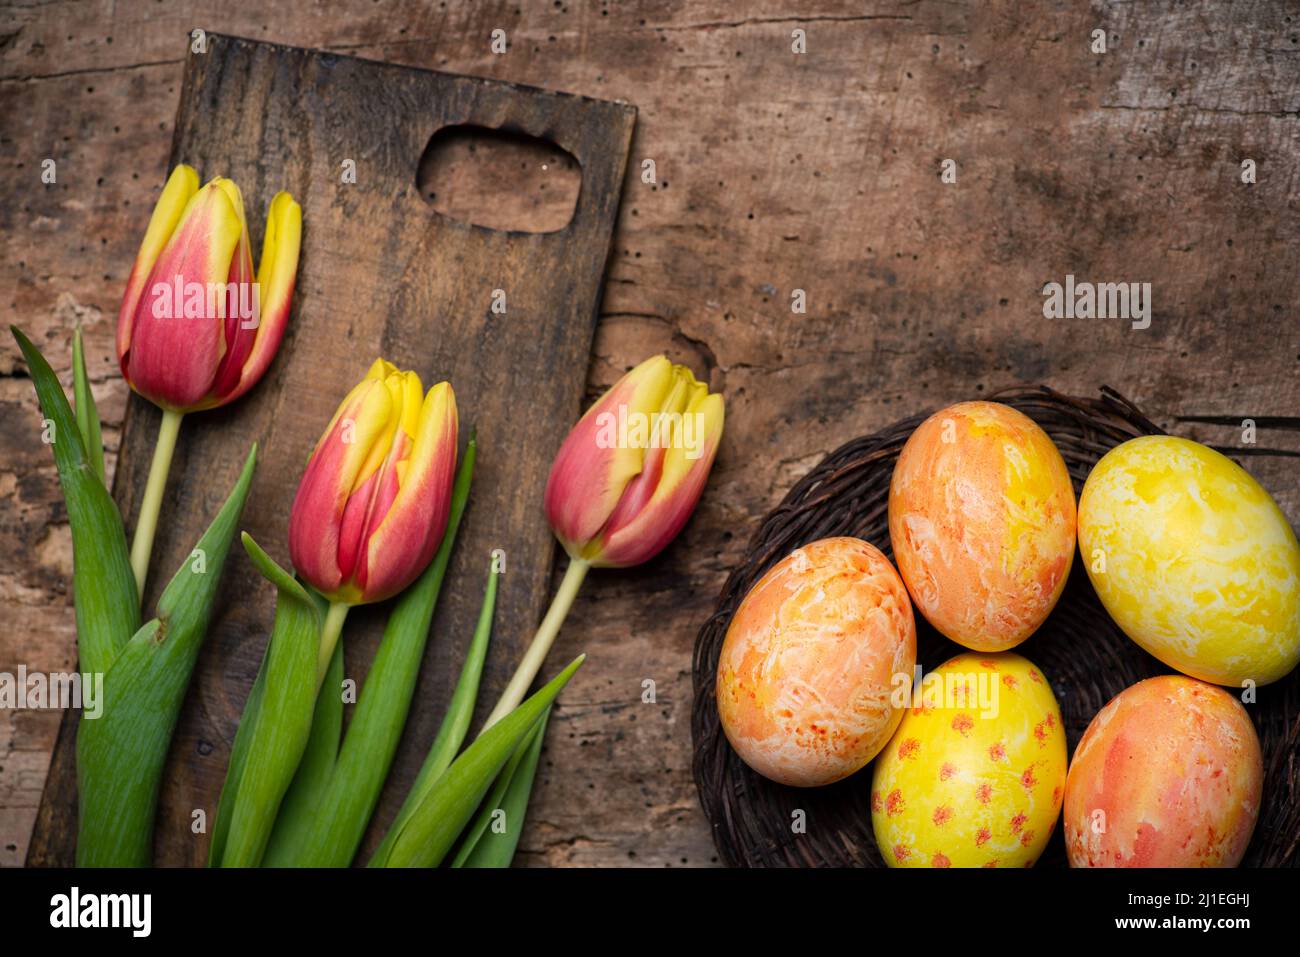 Colorful red and yellow tulips with hand painted Easter eggs on a wooden table tabletop view with copy space Stock Photo